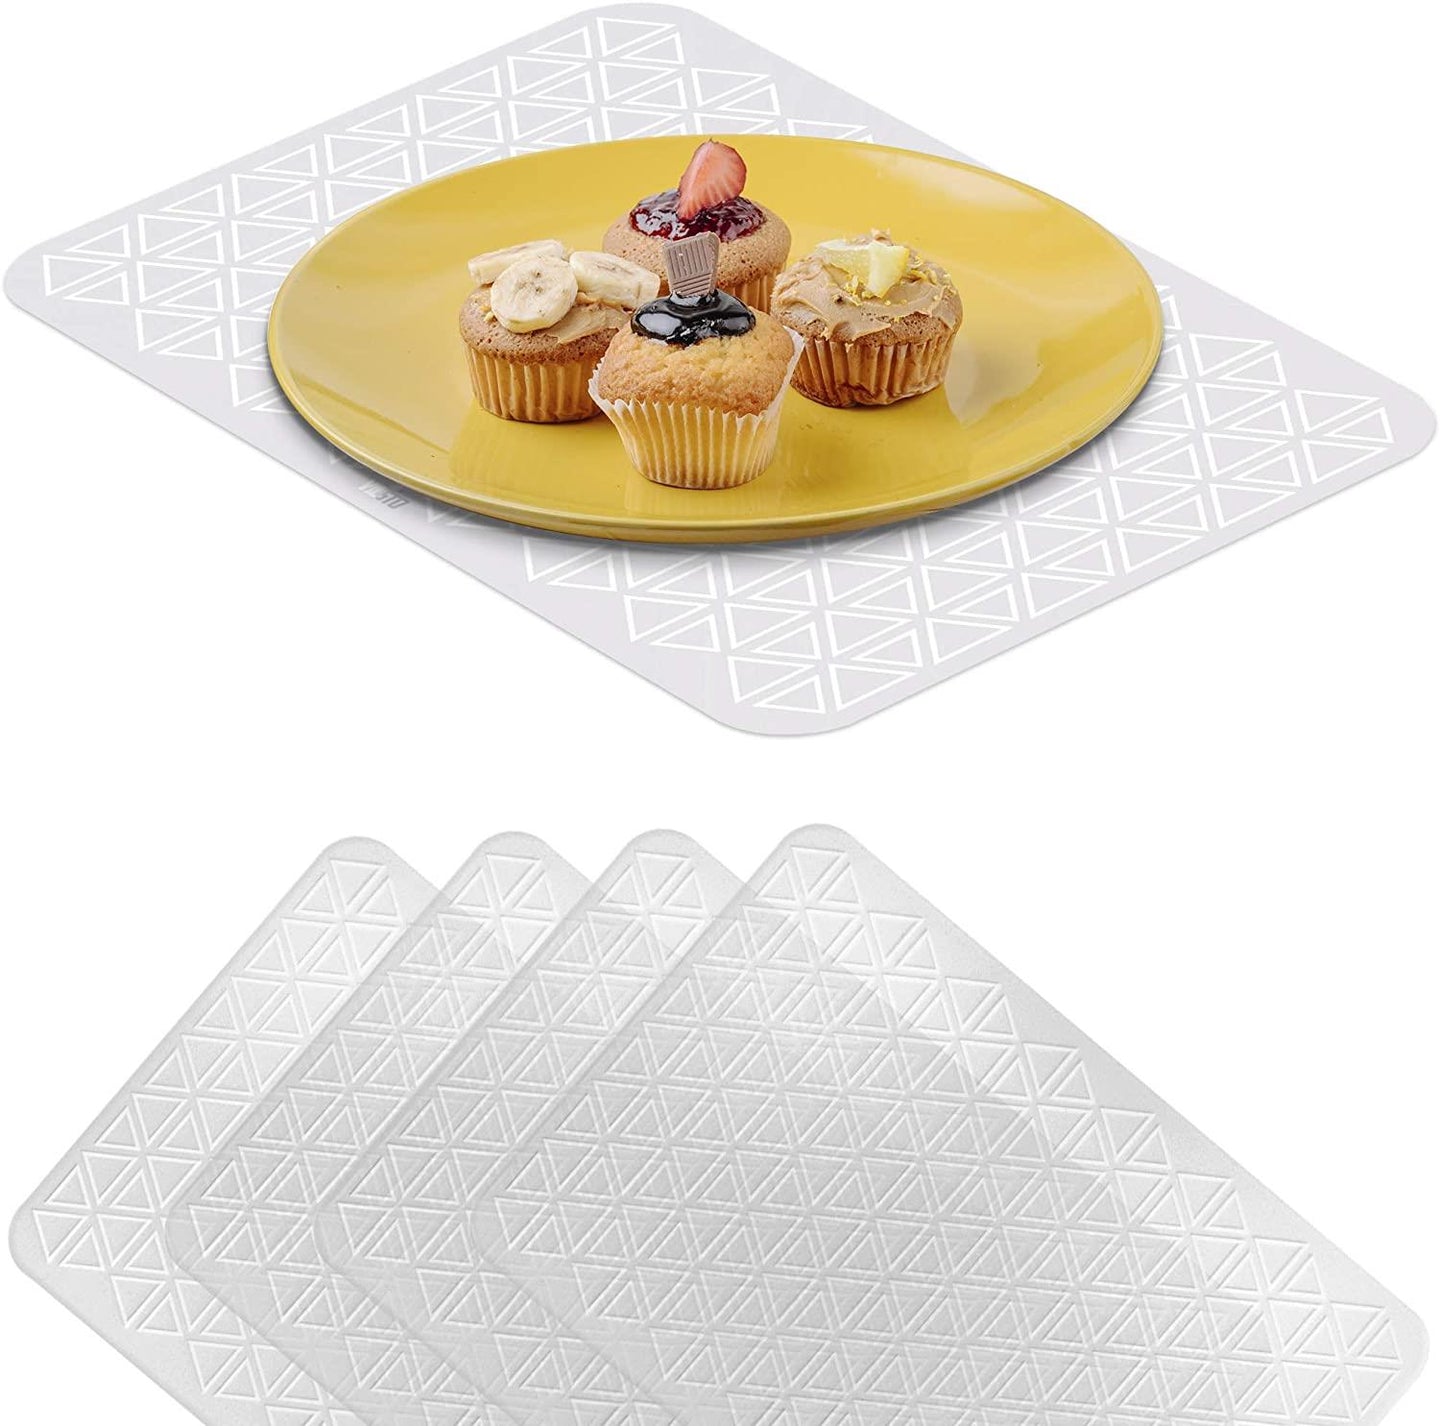 VILSTO Transparent Kitchen Mat, Coffe Table Mat, Table Protector, Waterproof Place Mats, Dining Table Placemat, Room Decor, Placemat Set 4 pieces